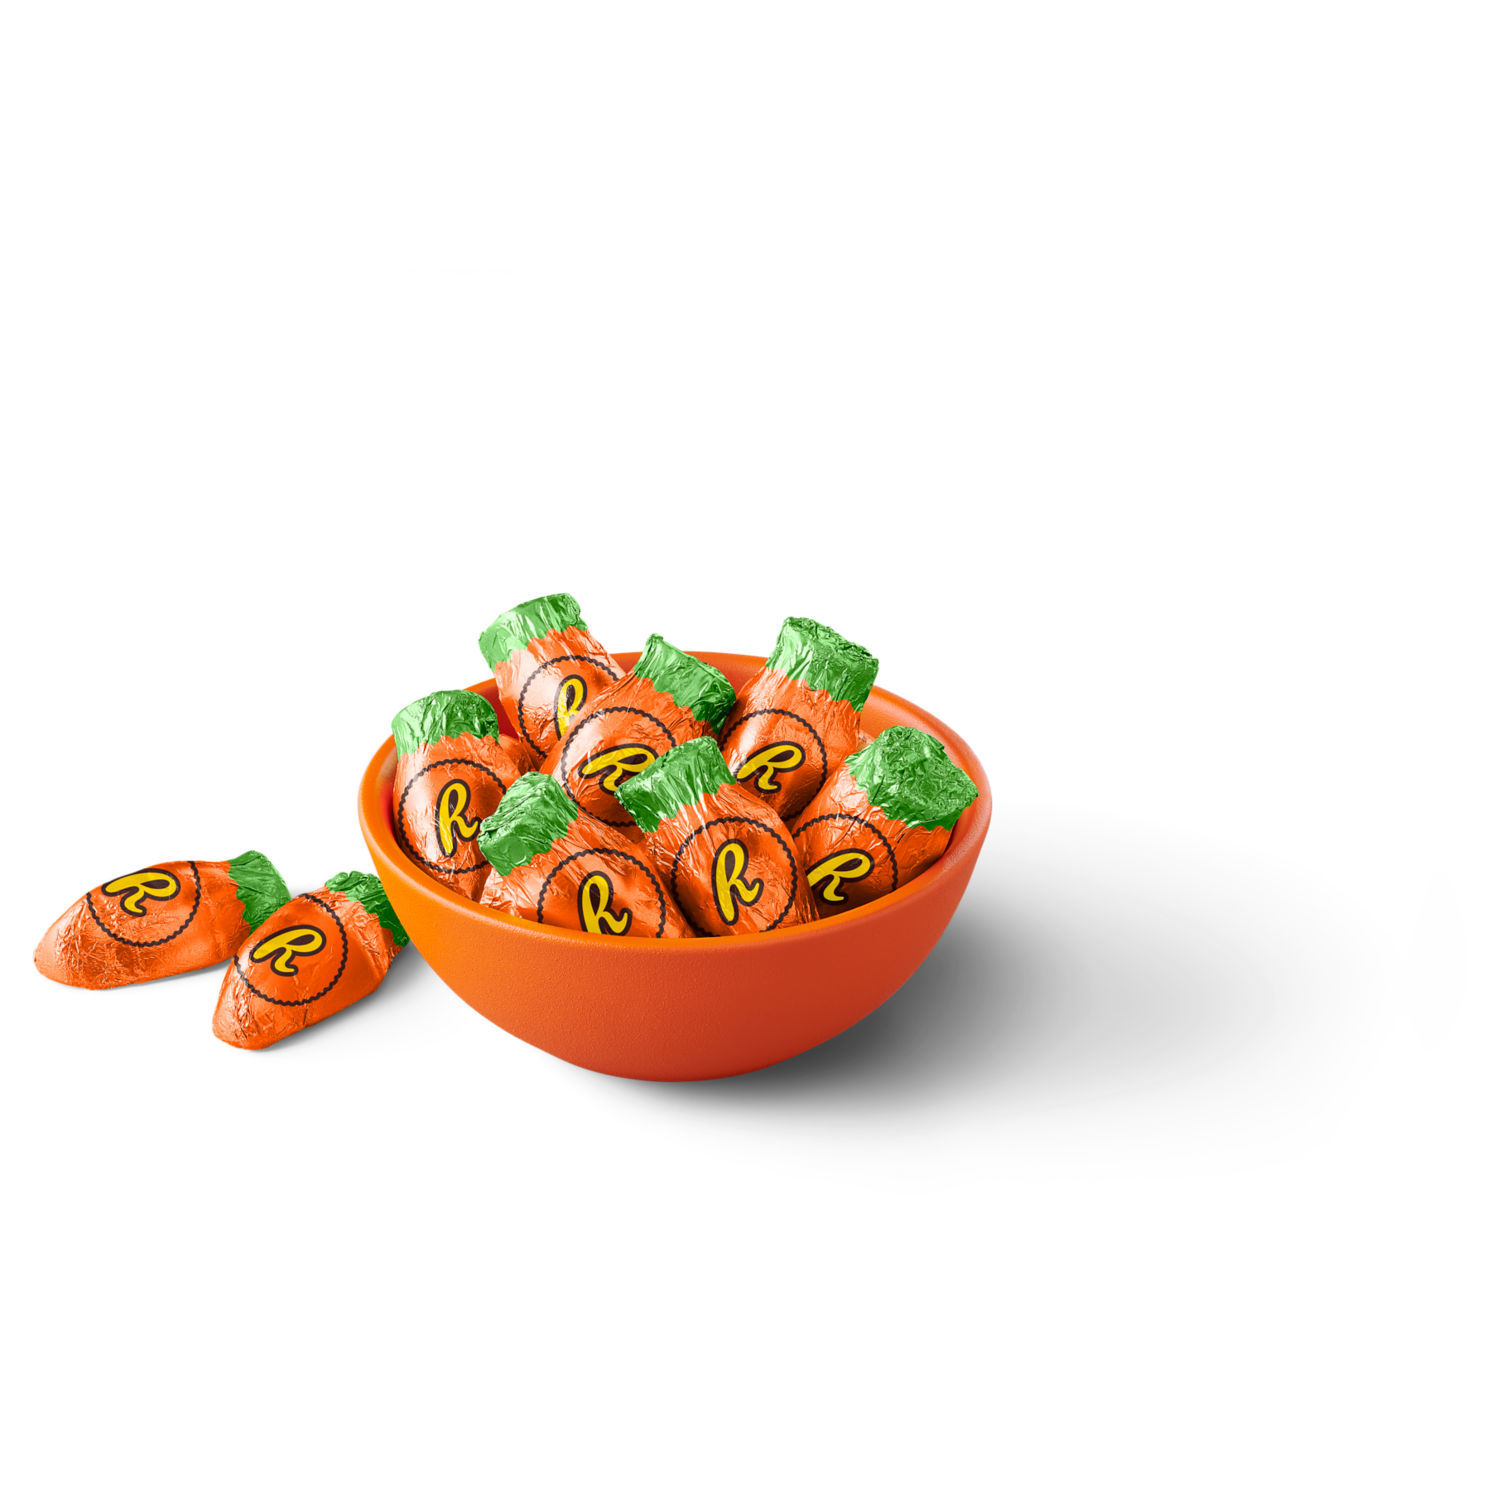 Reese's Milk Chocolate Peanut Butter Creme Carrots Easter Candy, Bag 9 oz - image 5 of 8